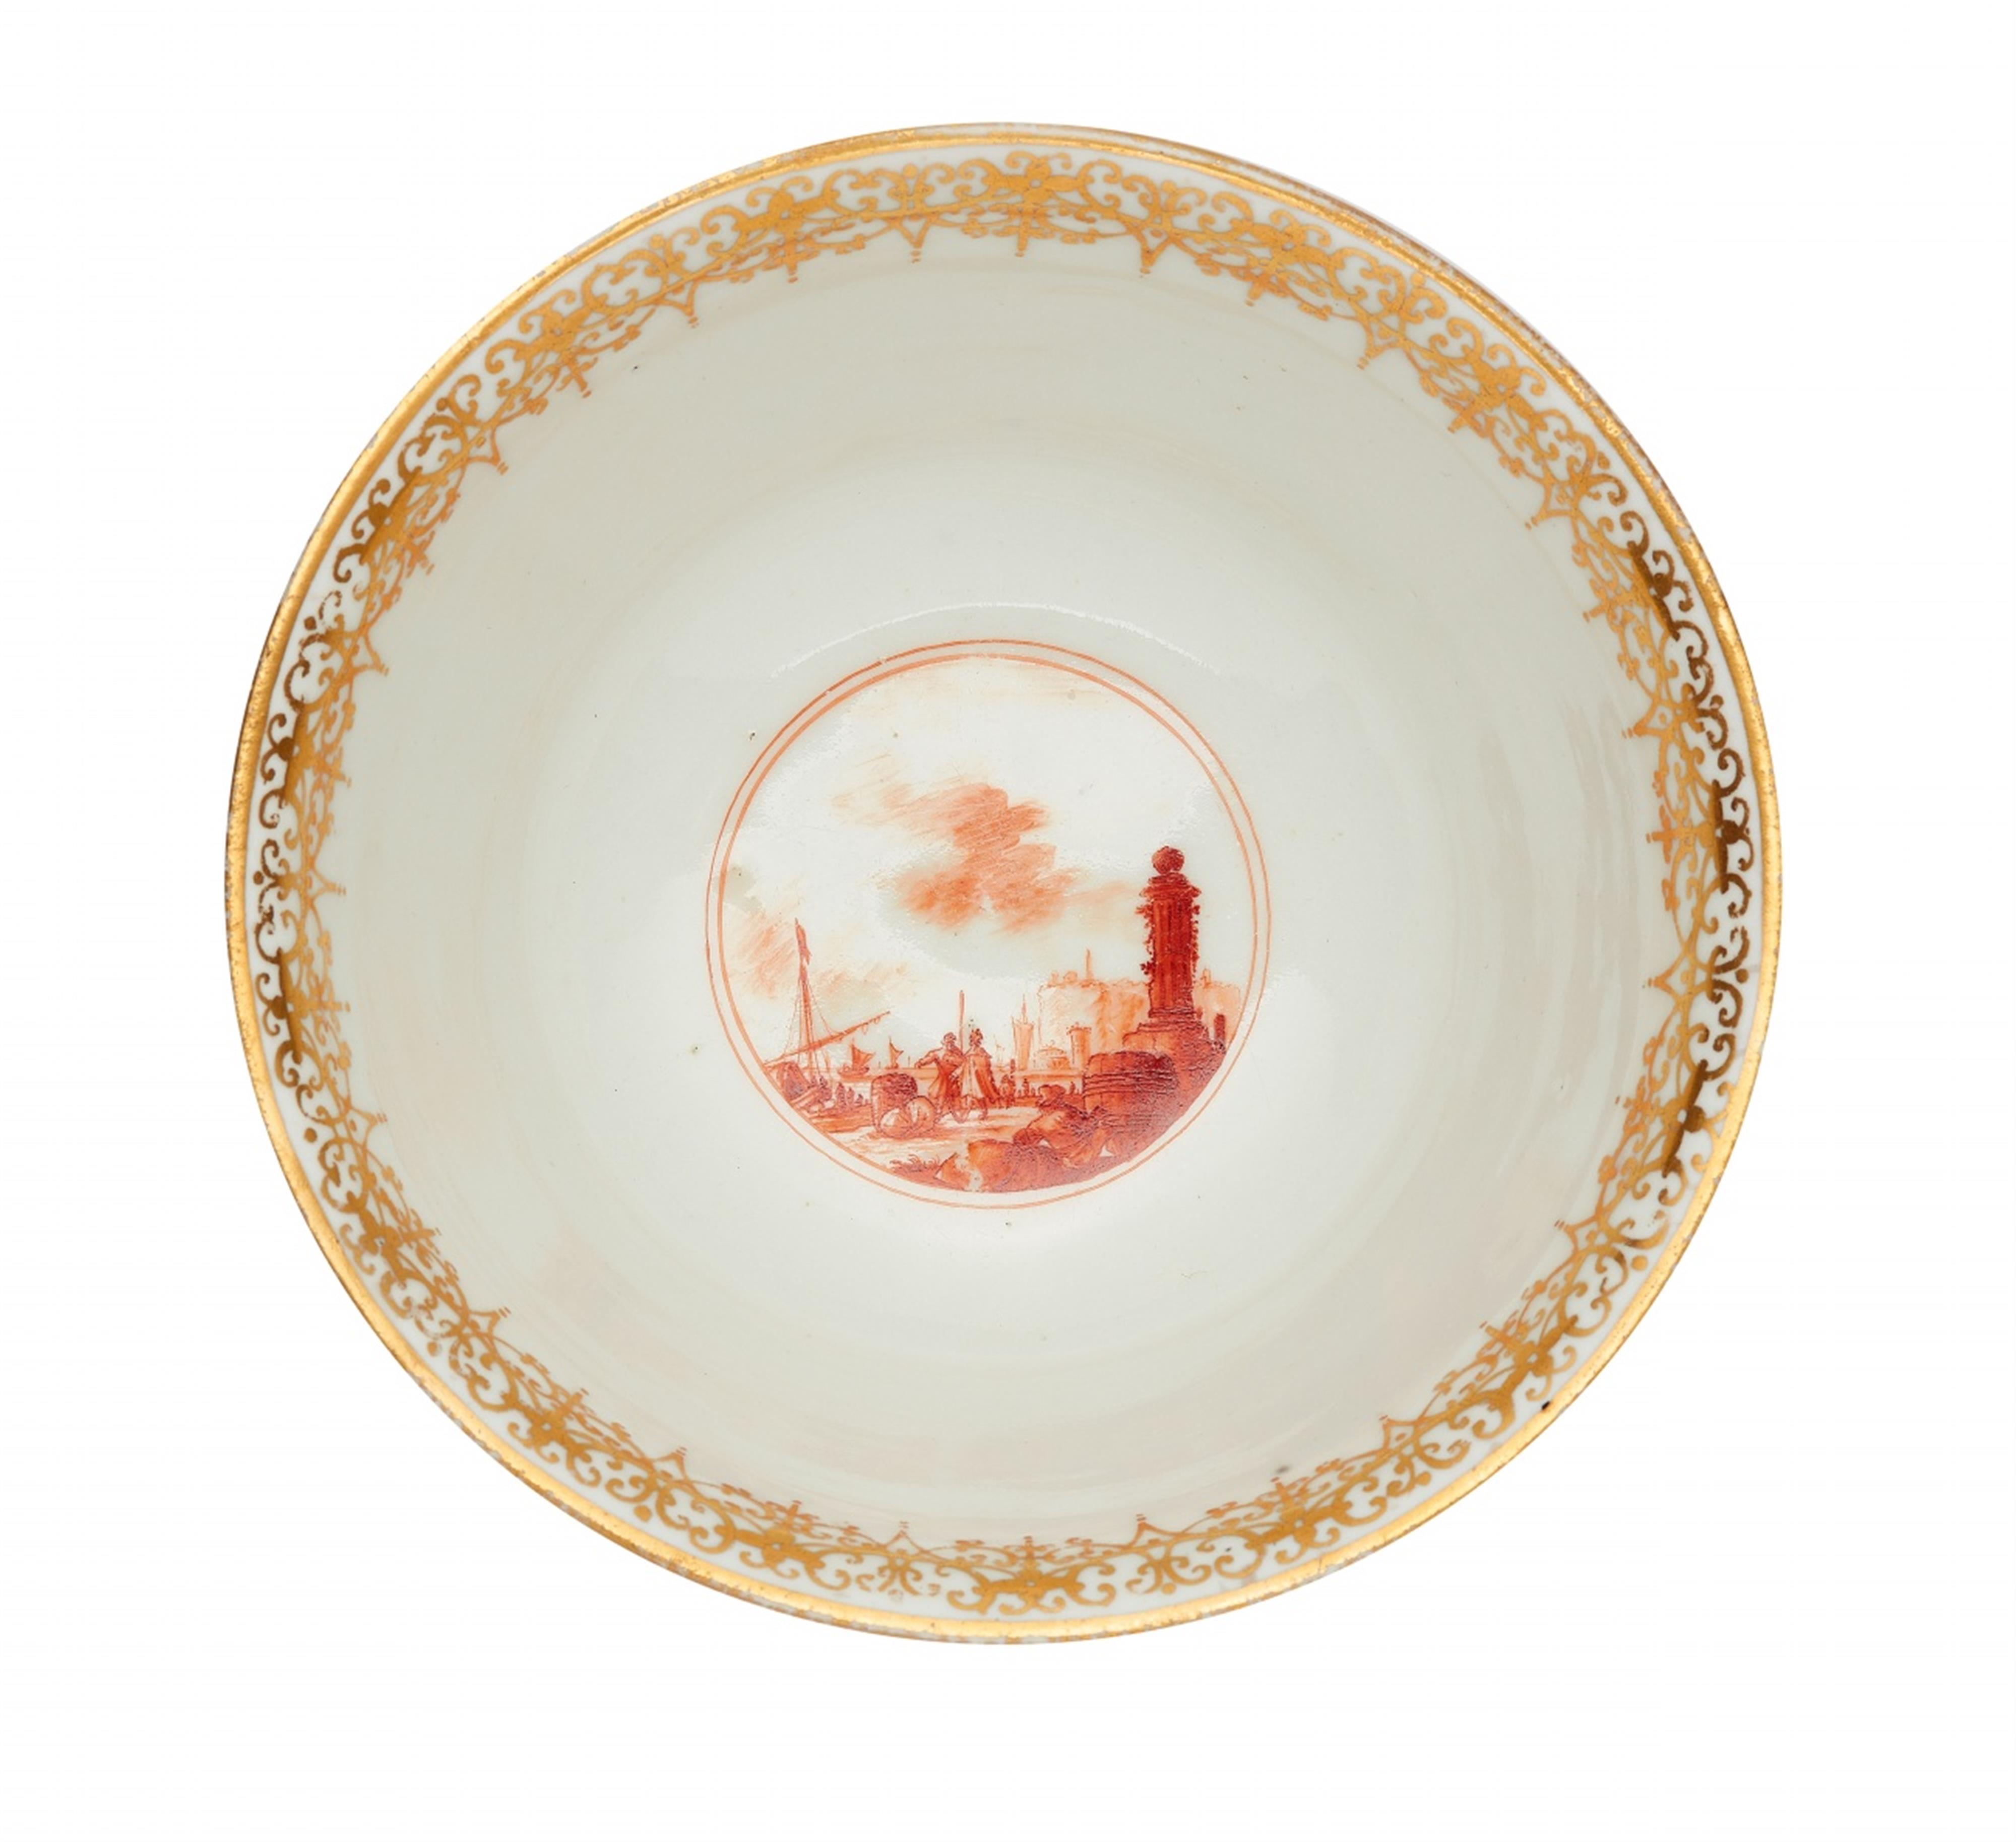 A Meissen porcelain slop bowl with a merchant navy scene in iron red - image-2